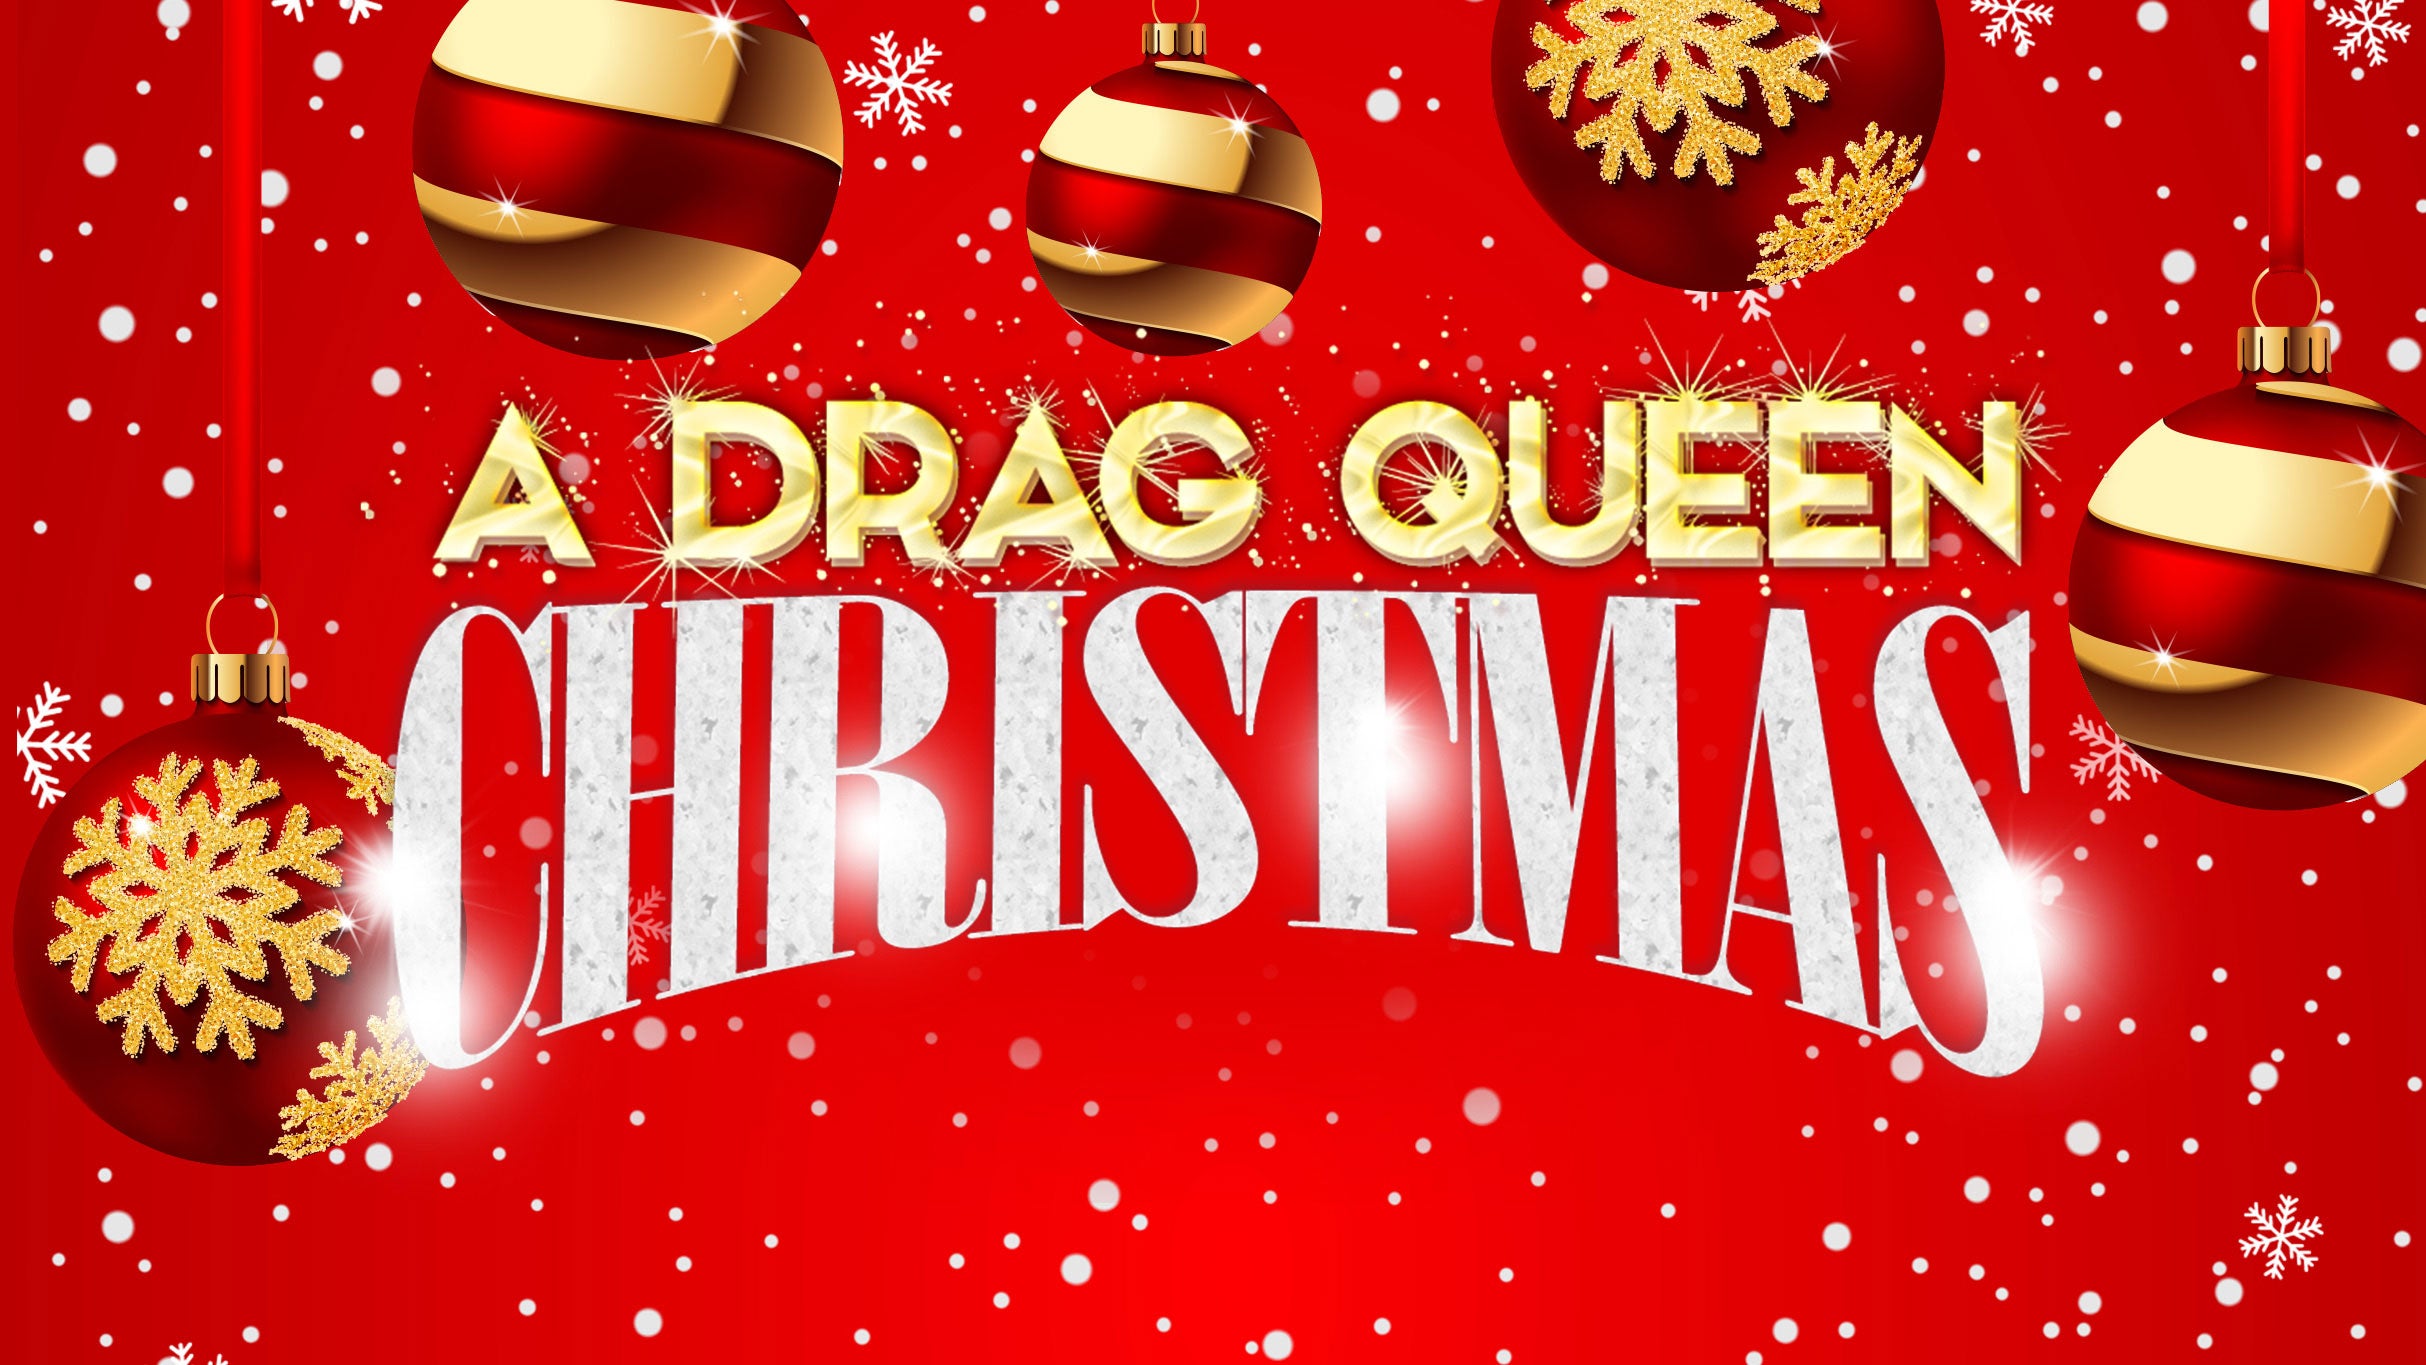 A Drag Queen Christmas free pre-sale password for early tickets in Seattle